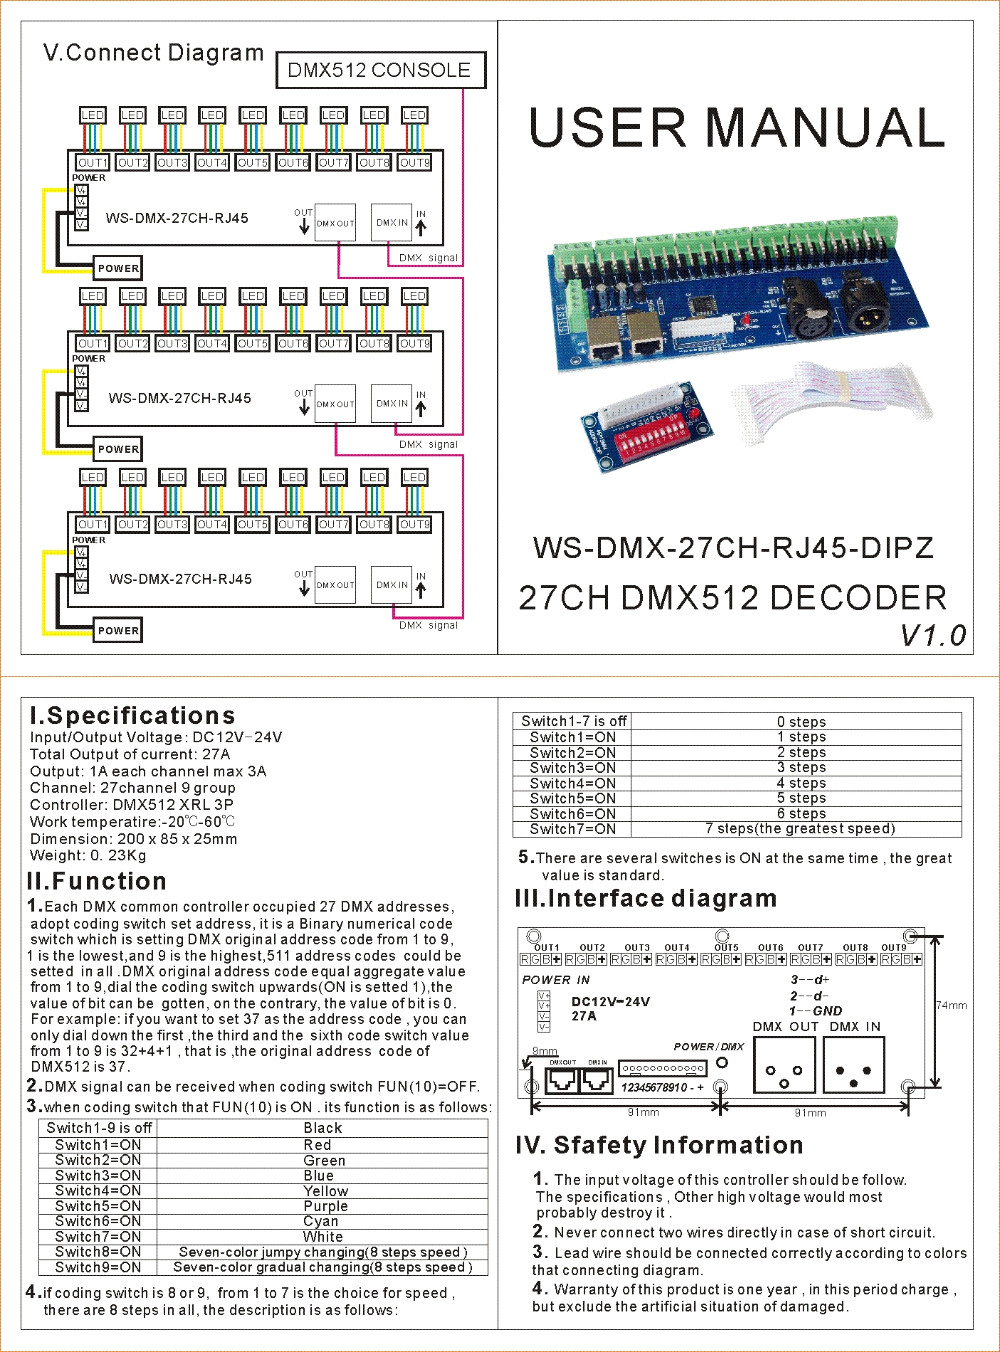 DMX_Controllers_and_Decoders_WS_DMX_27CH_RJ45_DIPZ_2